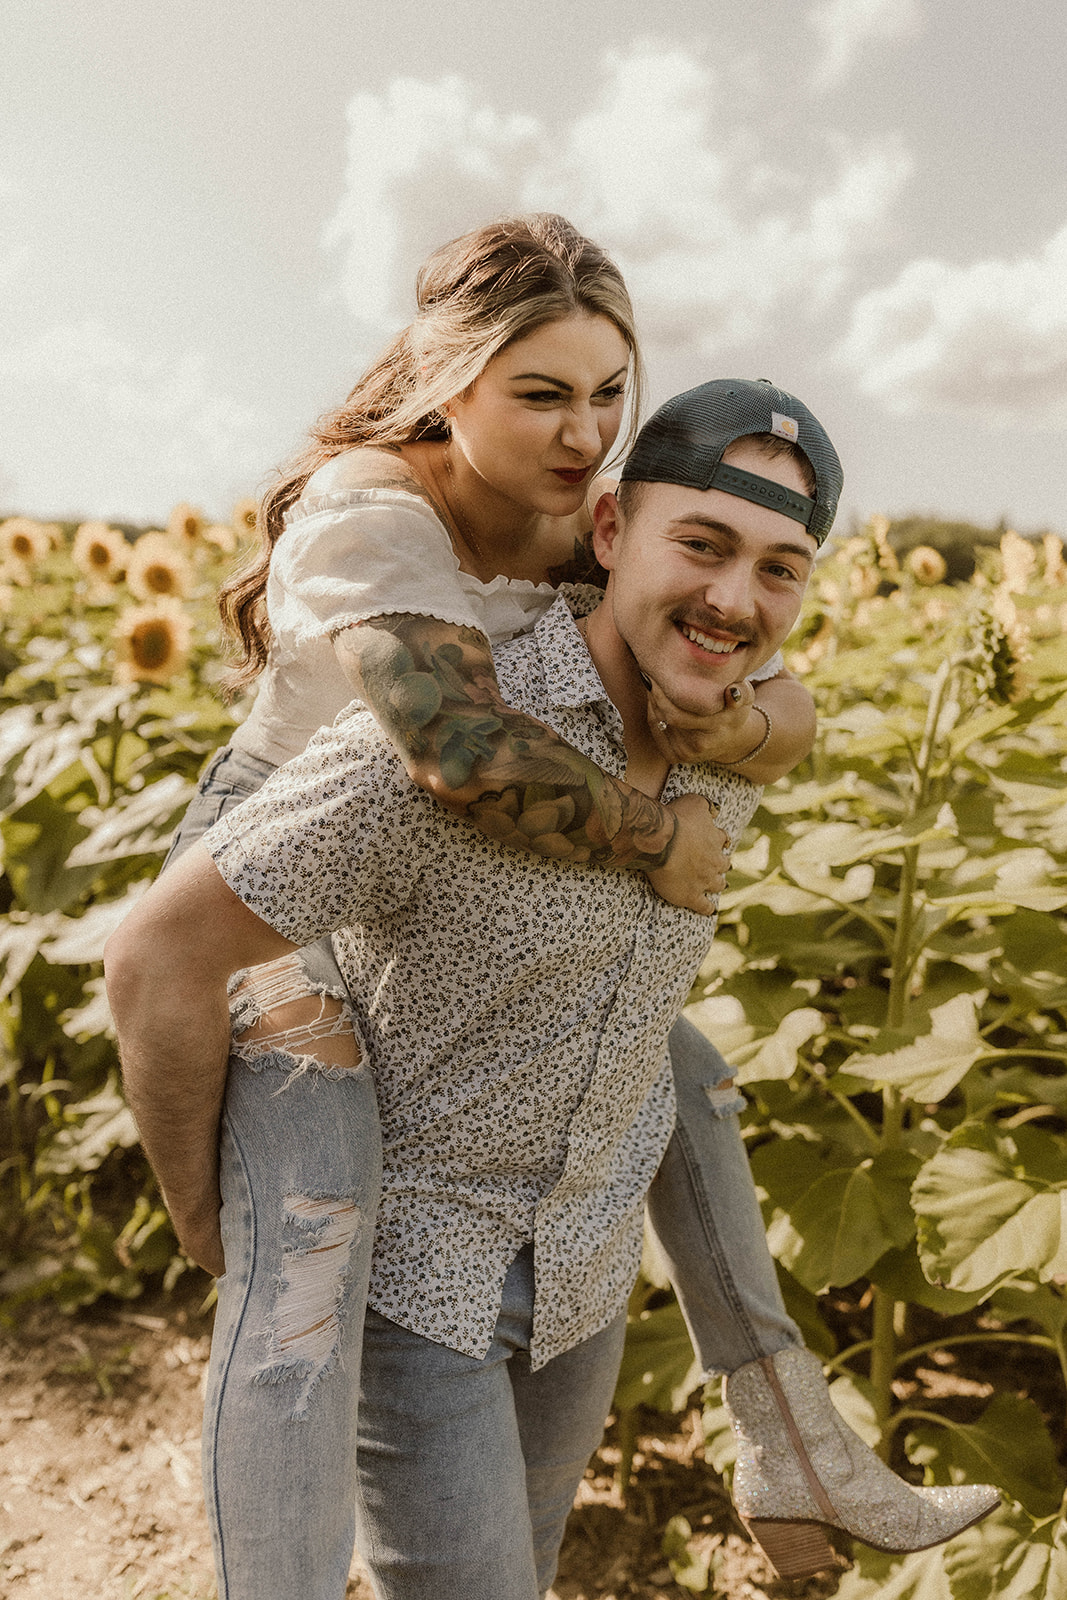 Man giving his fiancee piggyback ride during their romantic and dreamy engagement photoshoot.